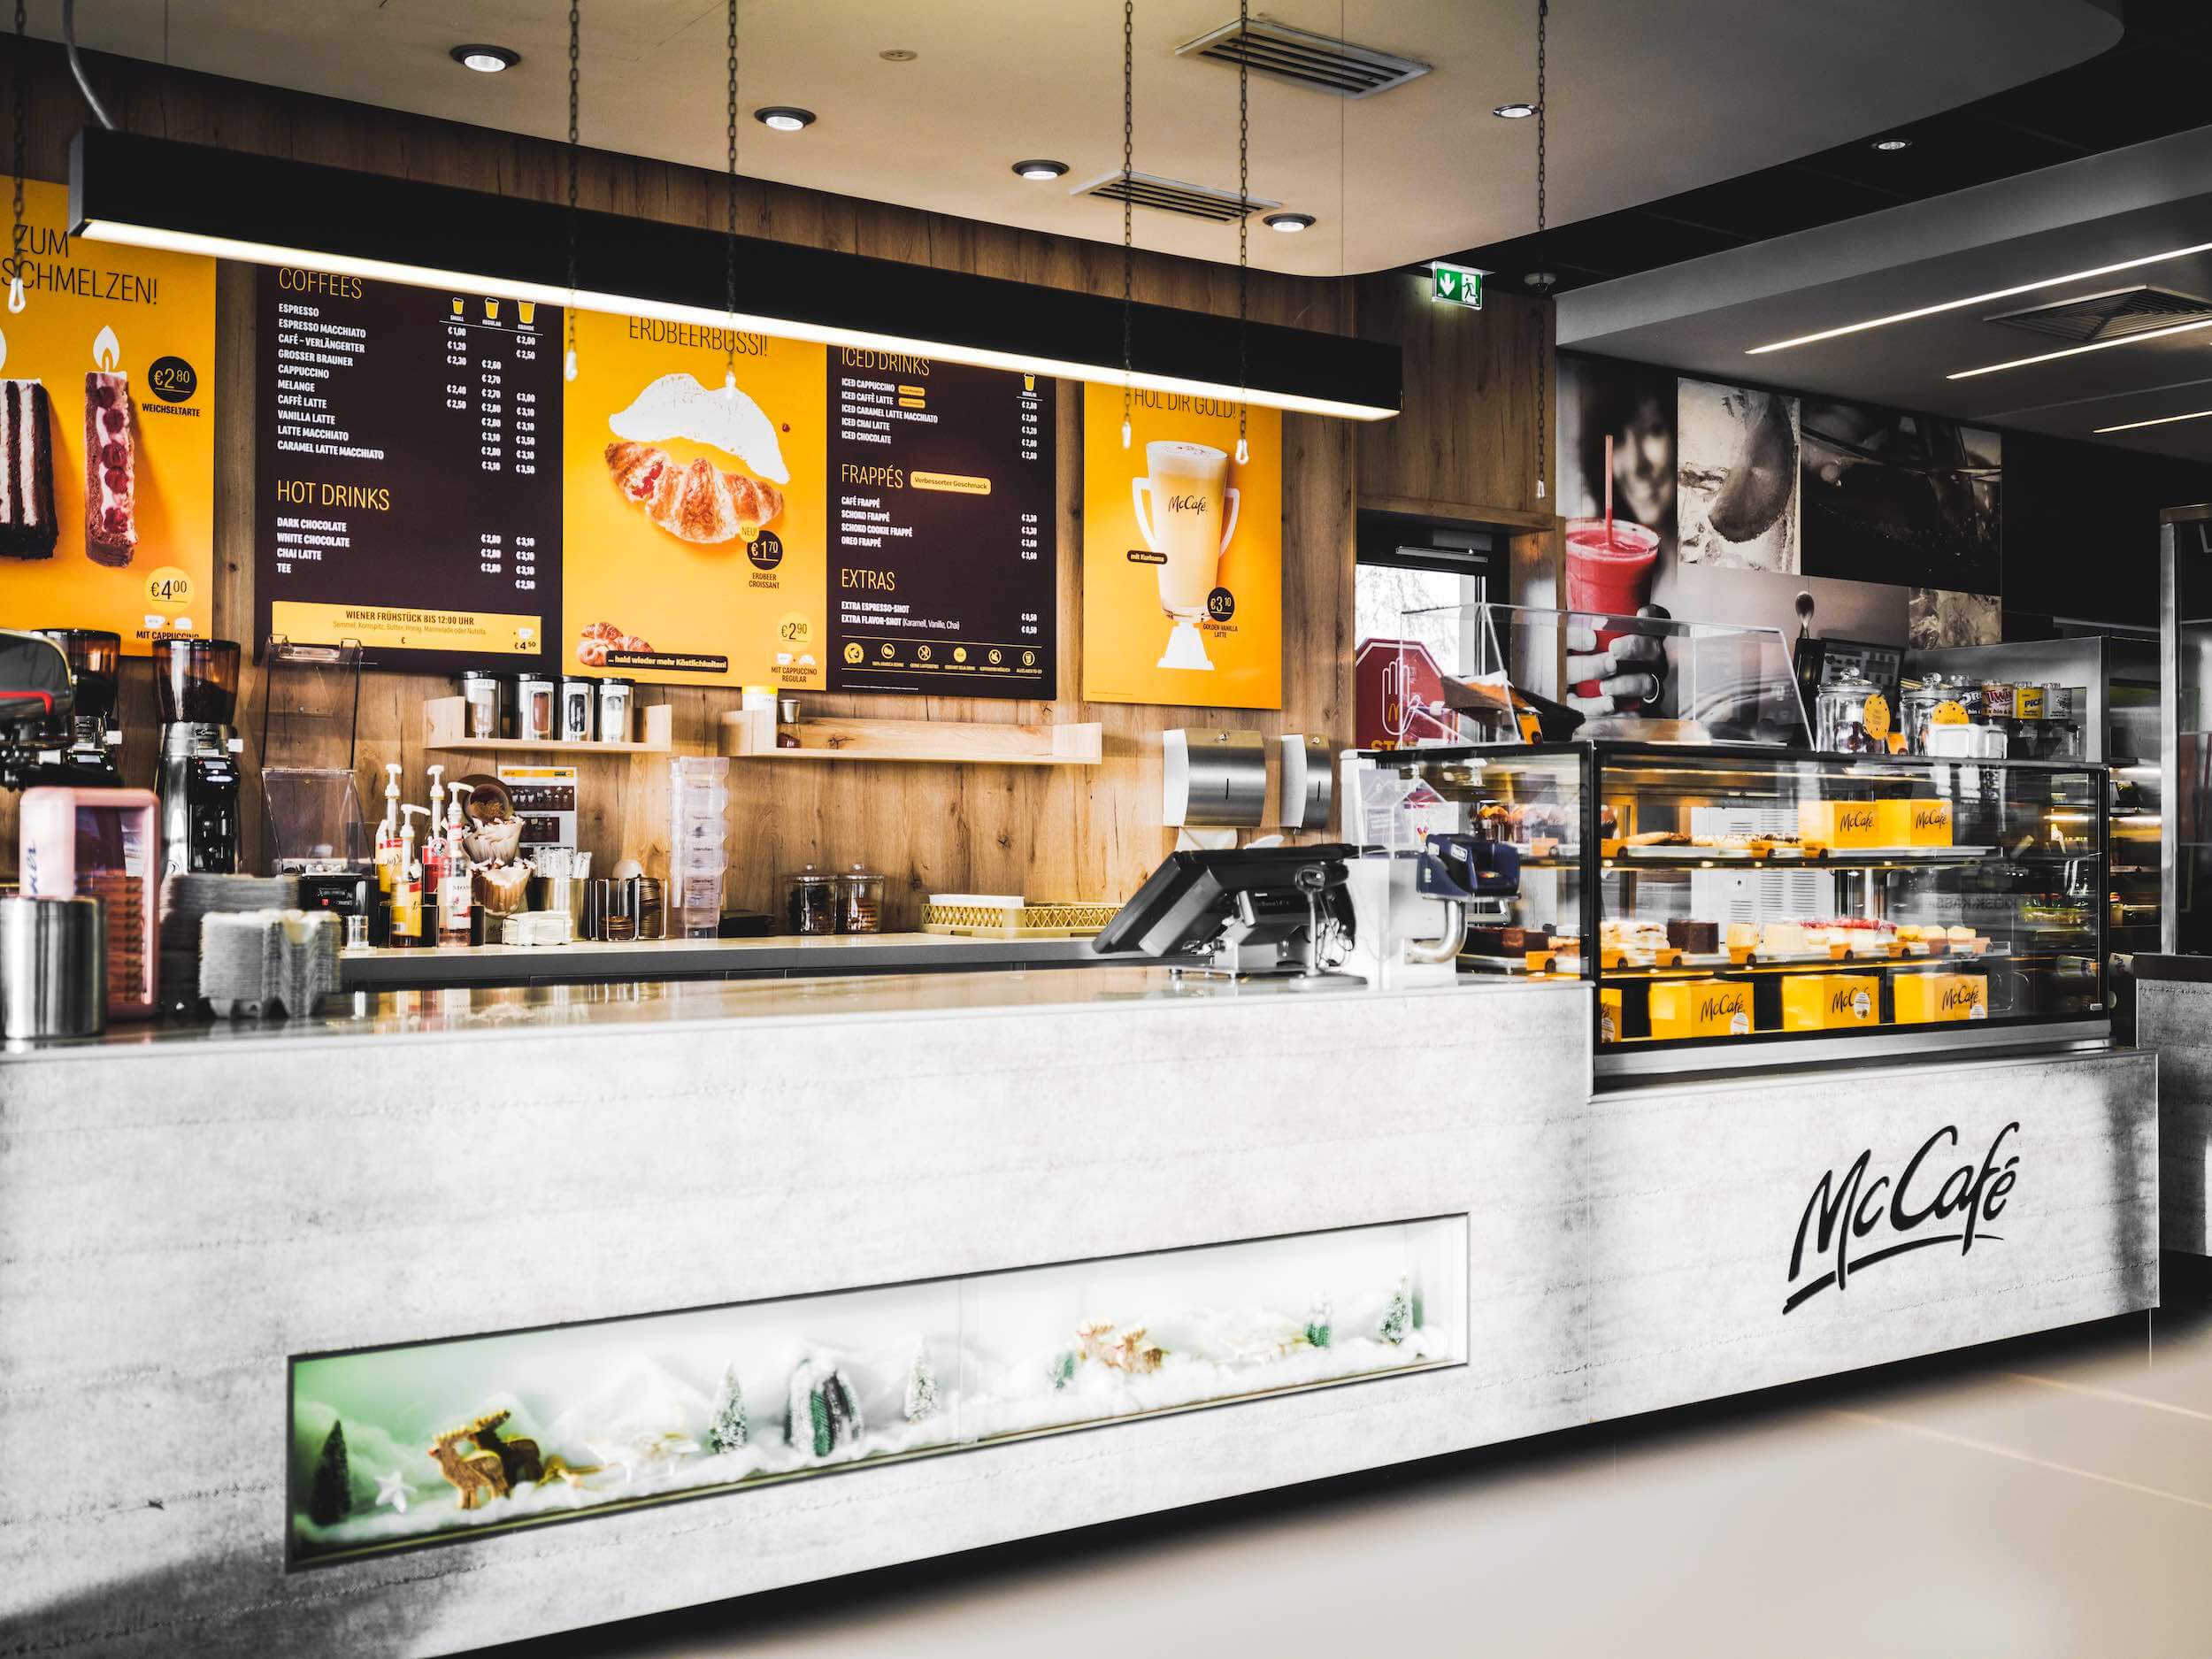 McCafe counter with printed menu posters